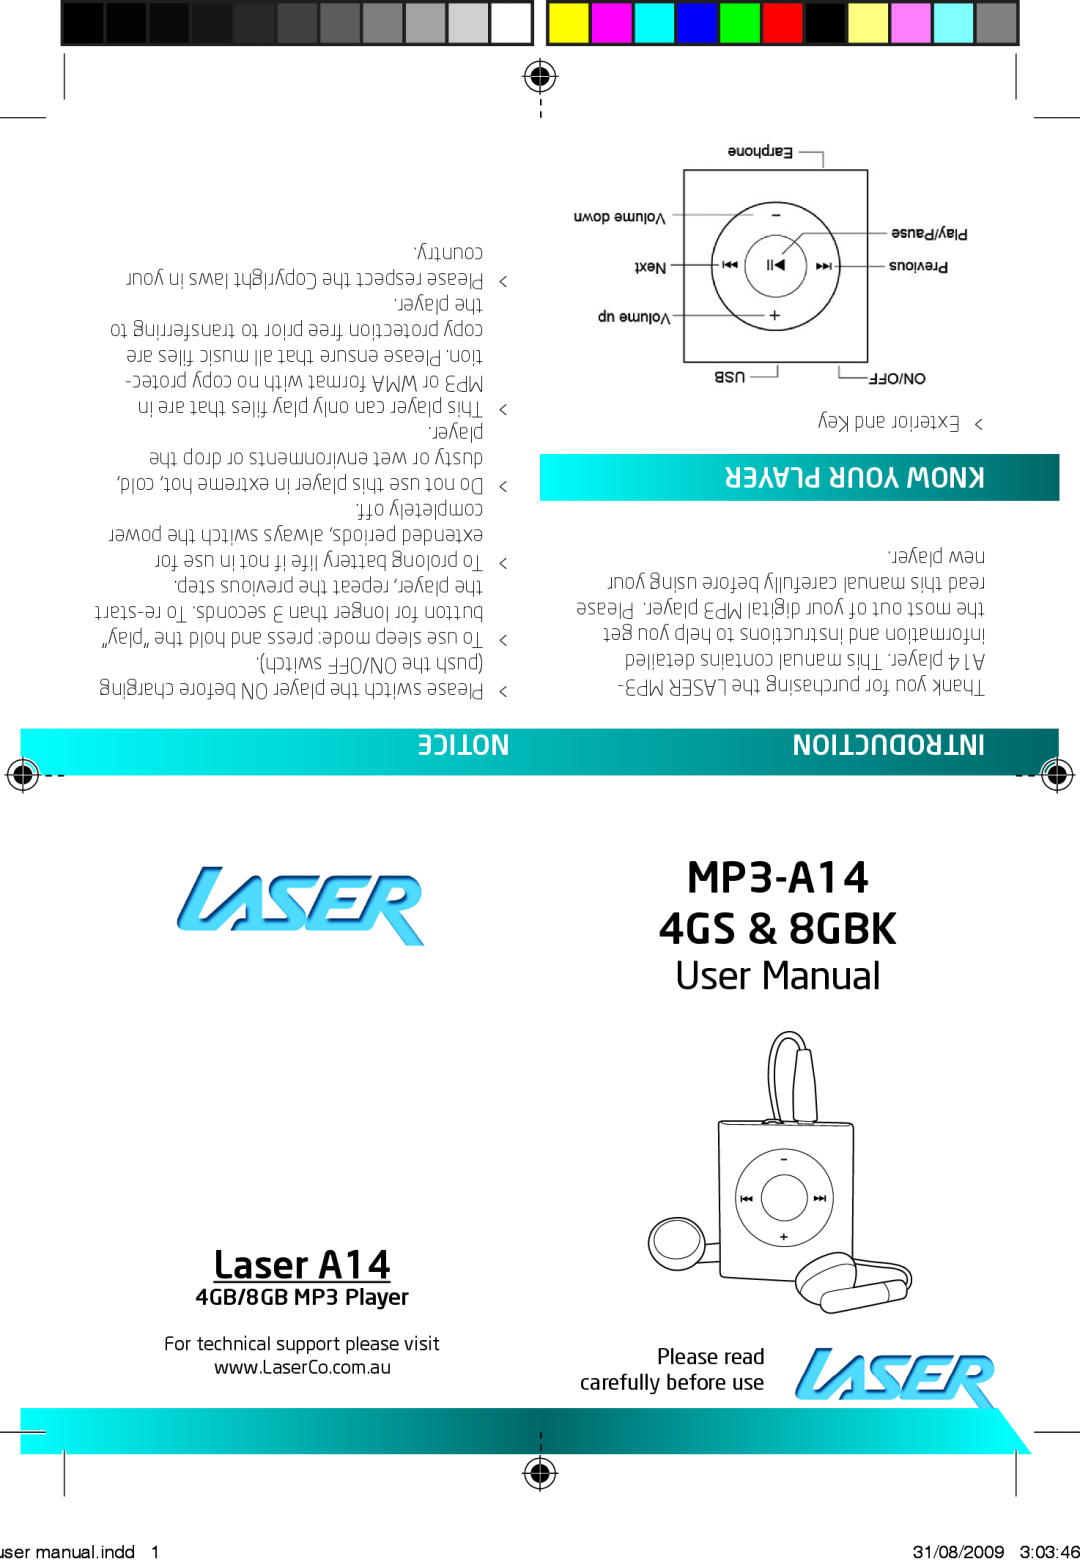 Laser MP3-A14-8GBK, MP3-A14-4GS user manual Player Your Know, Introduction, MP3-A14 4GS & 8GBK, User Manual, Laser A14 